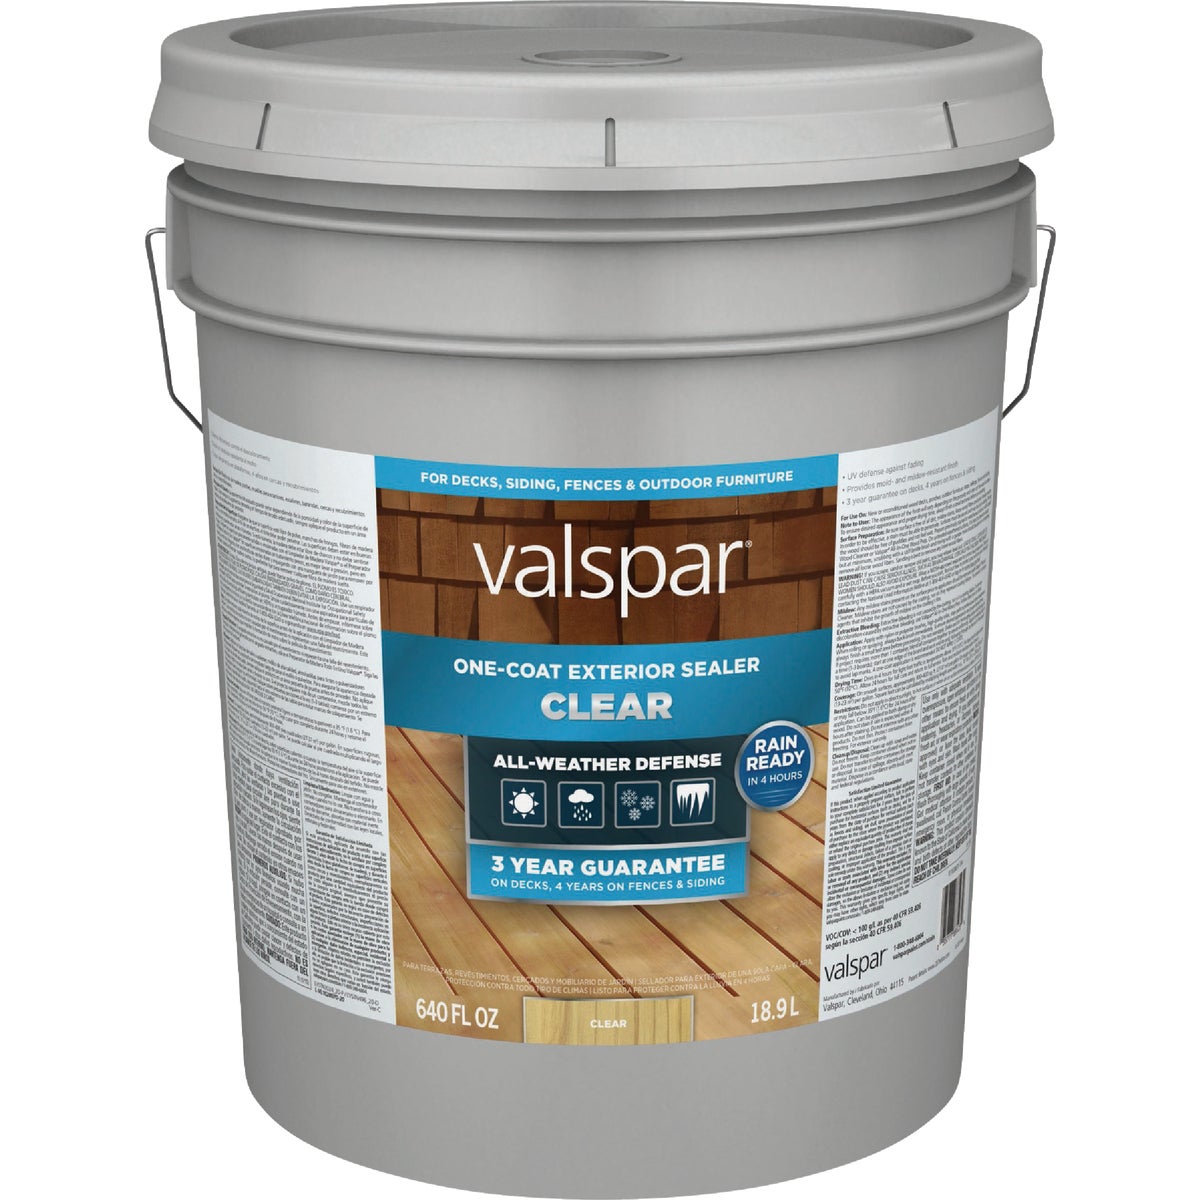 Valspar One-Coat Deck Stain, Clear, 5 Gal.